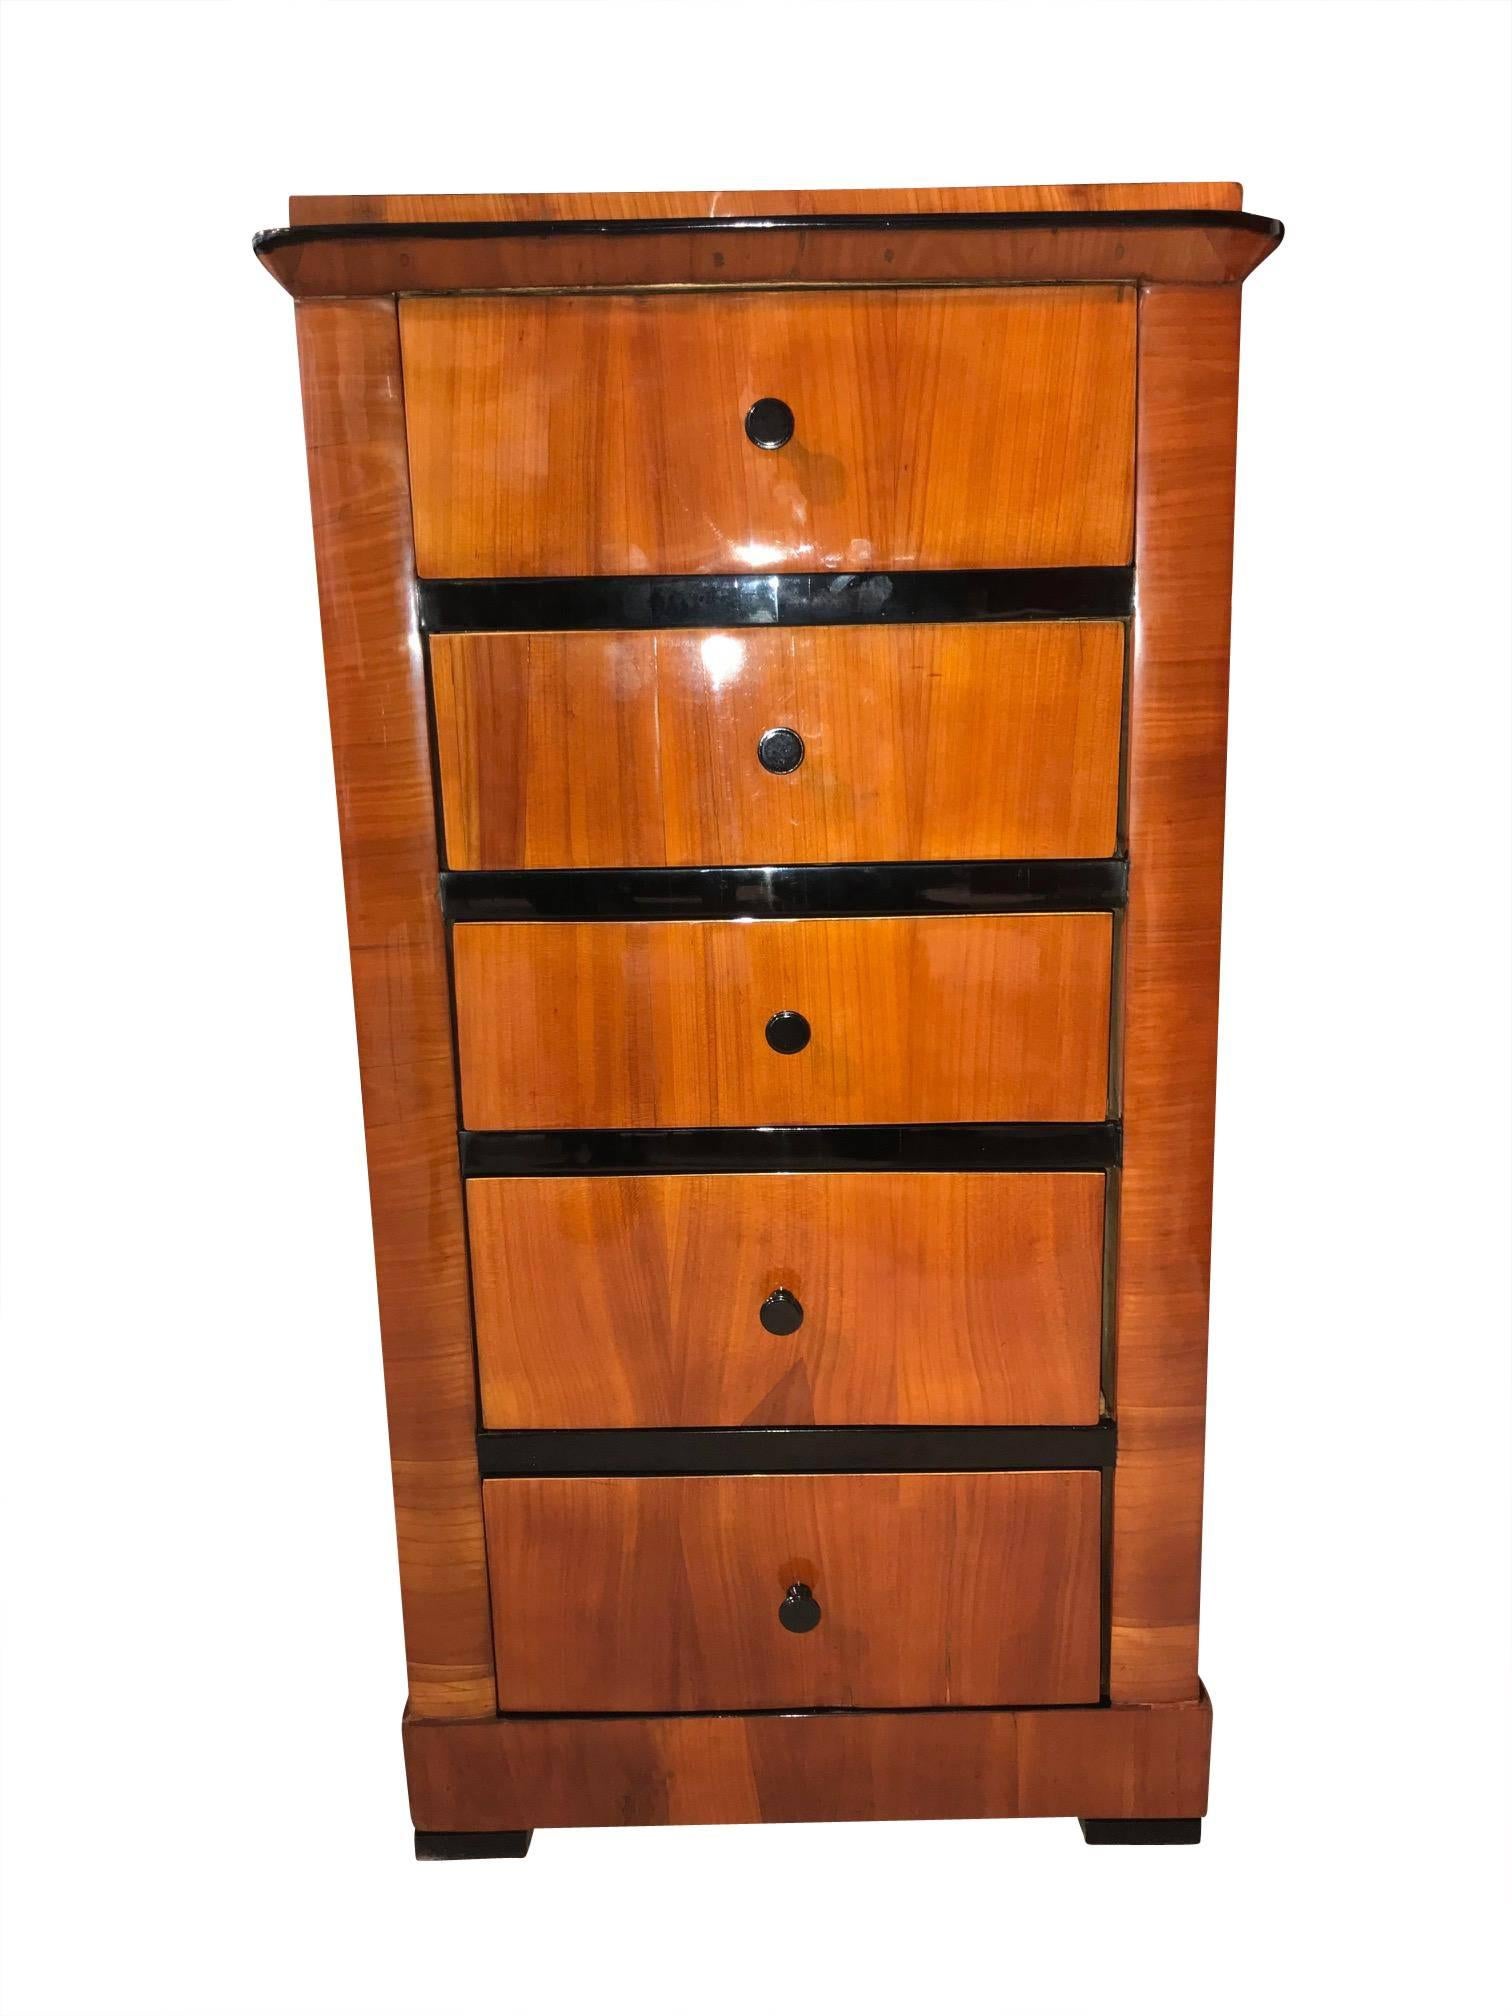 Rare, petite Biedermeier pillar cabinet /chest of drawers. It has a beautiful continuous cheerywood veneer over the five drawers at the front, which are interrupted by thick ebonized crosspieces. It is shellac hand-polished and in great condition.